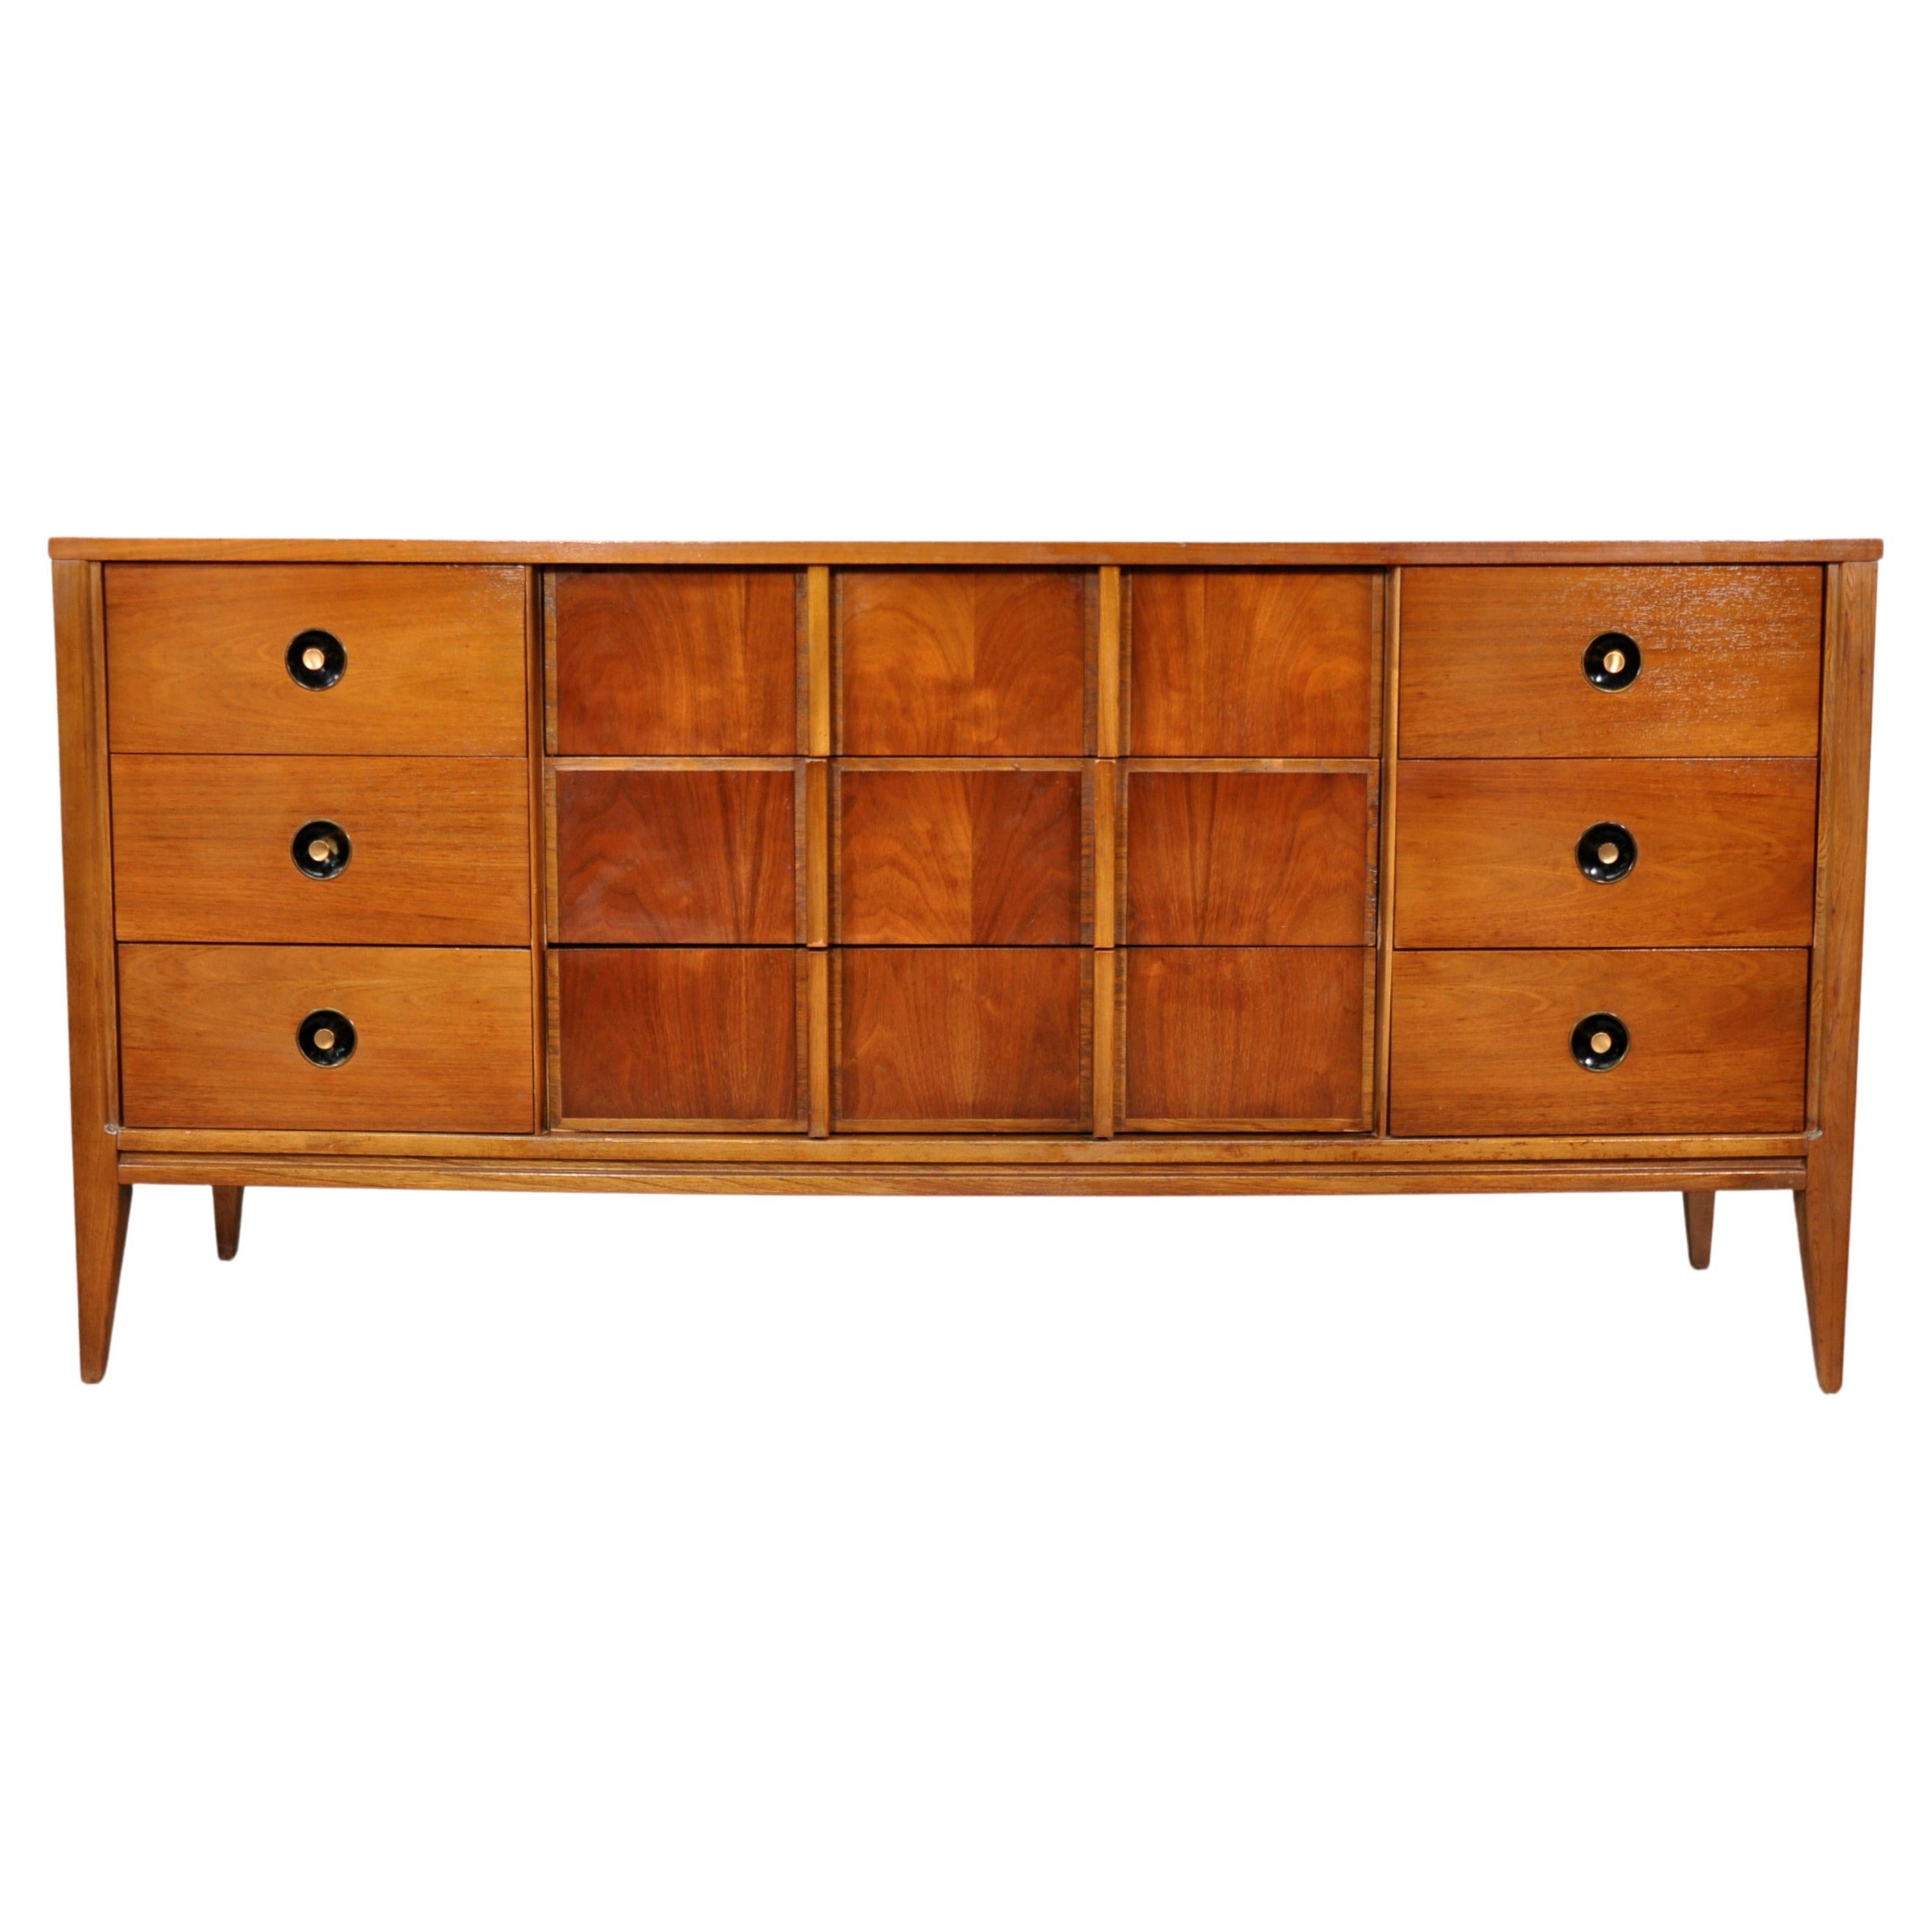 Vintage walnut and brass triple dresser by Stanley Furniture. The Mid-Century Modern credenza features 9 drawers, recessed black hardware with brass pulls, oak interiors and beautiful walnut grain. A ton of storage space with a ton of style!